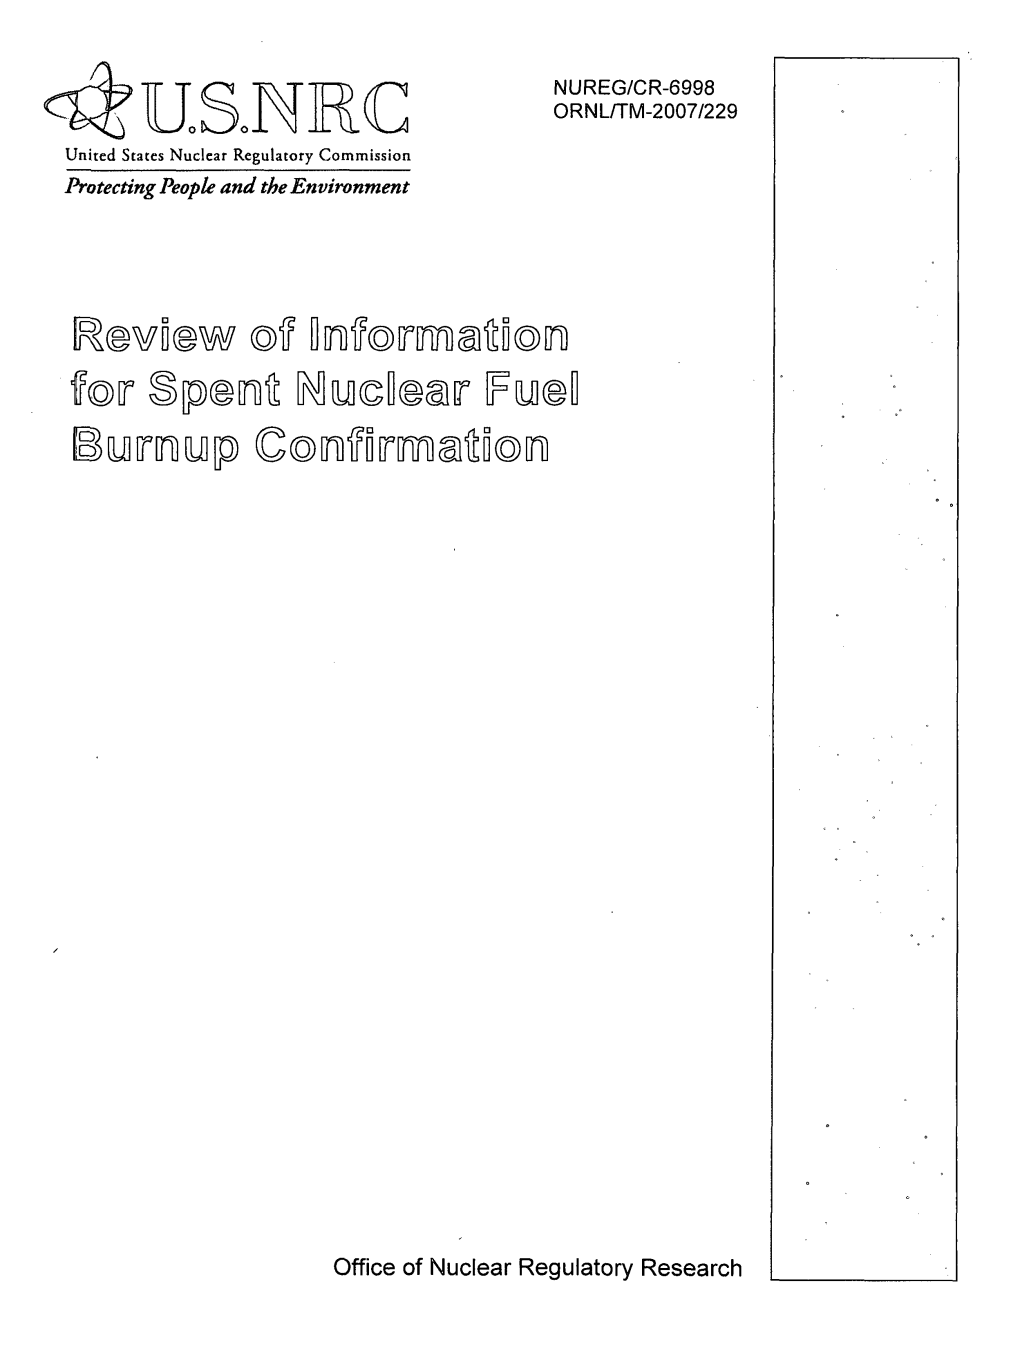 NUREG/CR-6998, Review of Information for Spent Nuclear Fuel